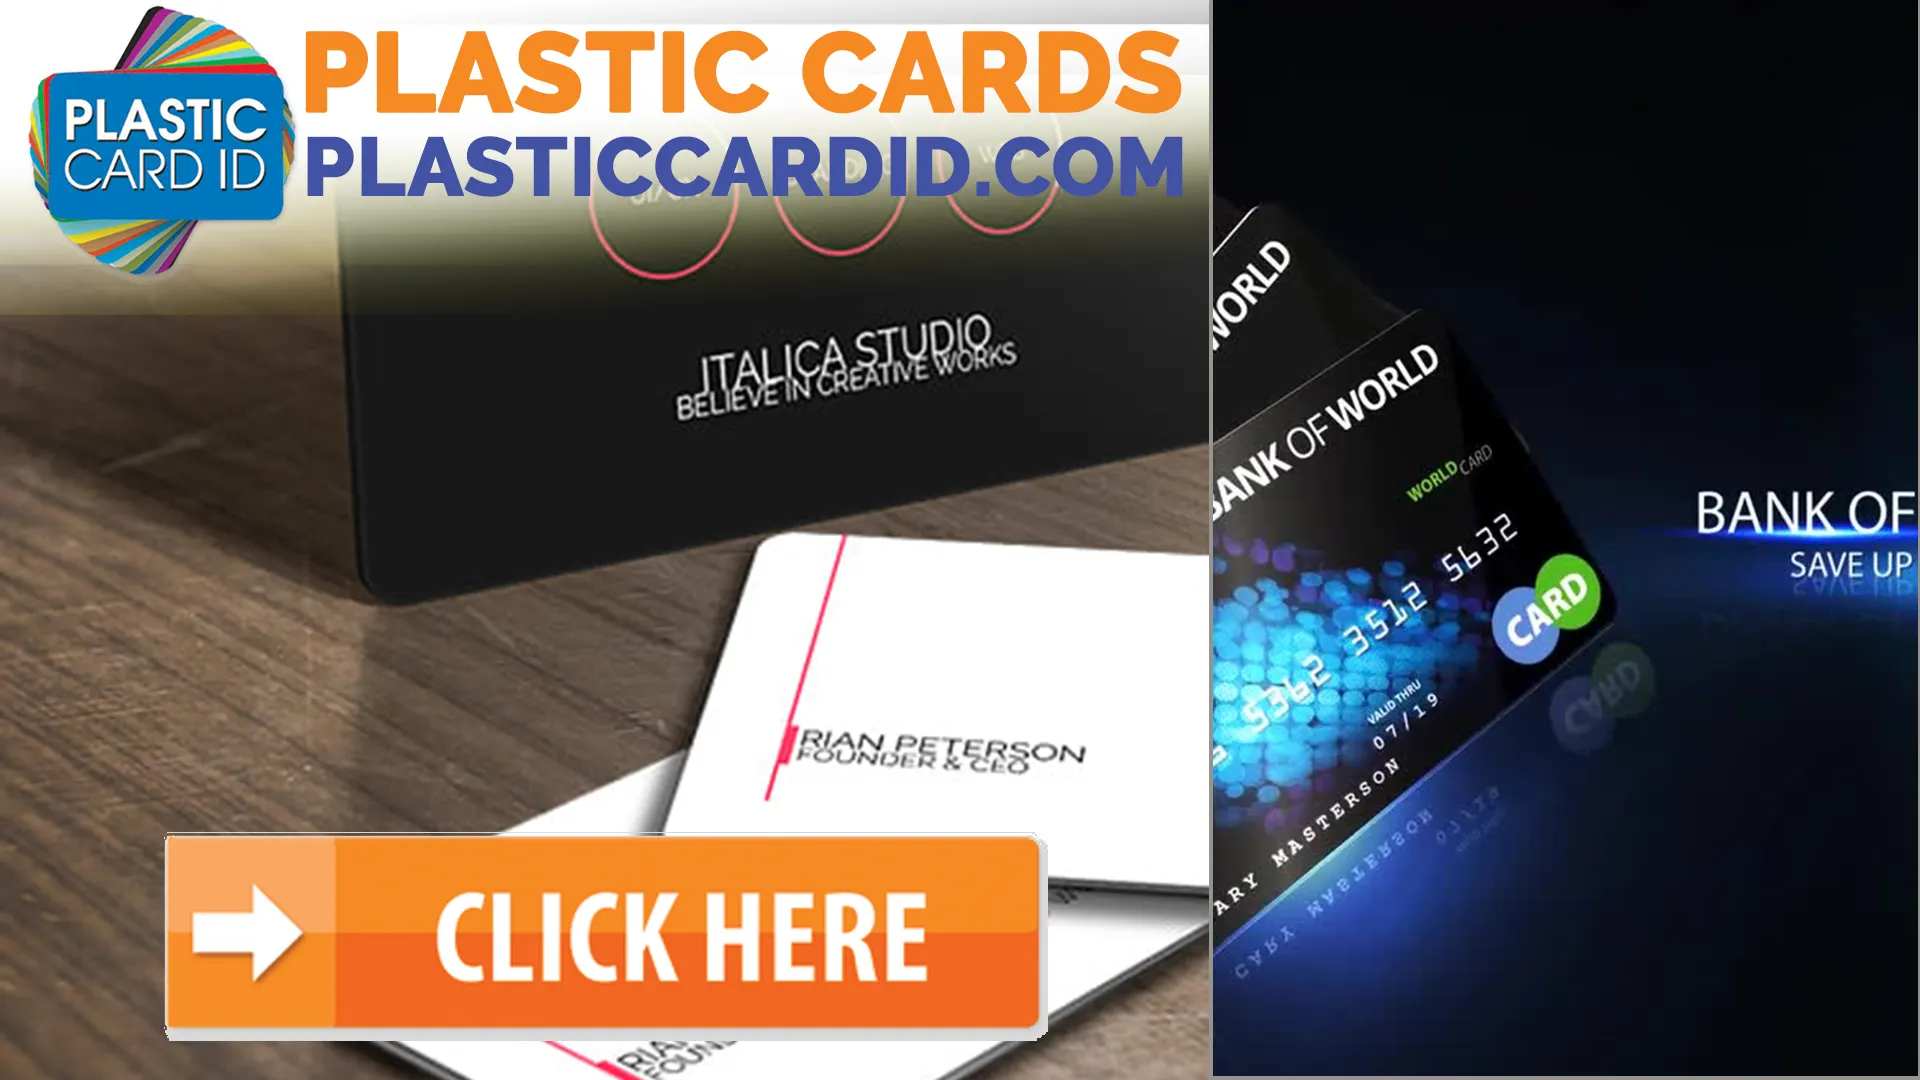 Personalizing Your Plastic Cards